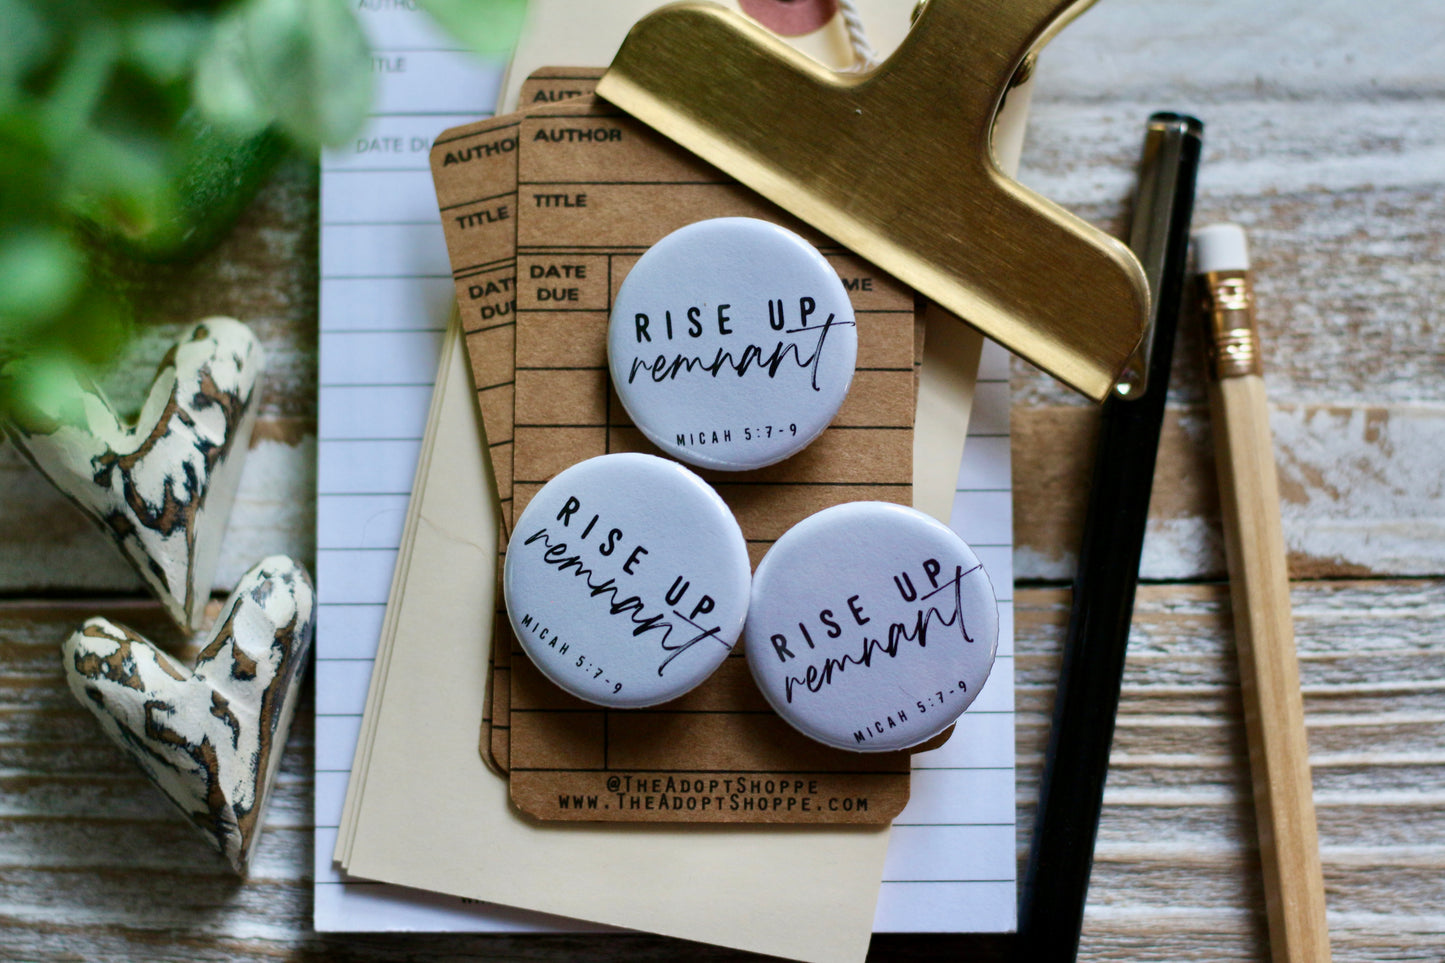 rise up remnant (Micah 5:7-9) flair button pin / magnet / flat back